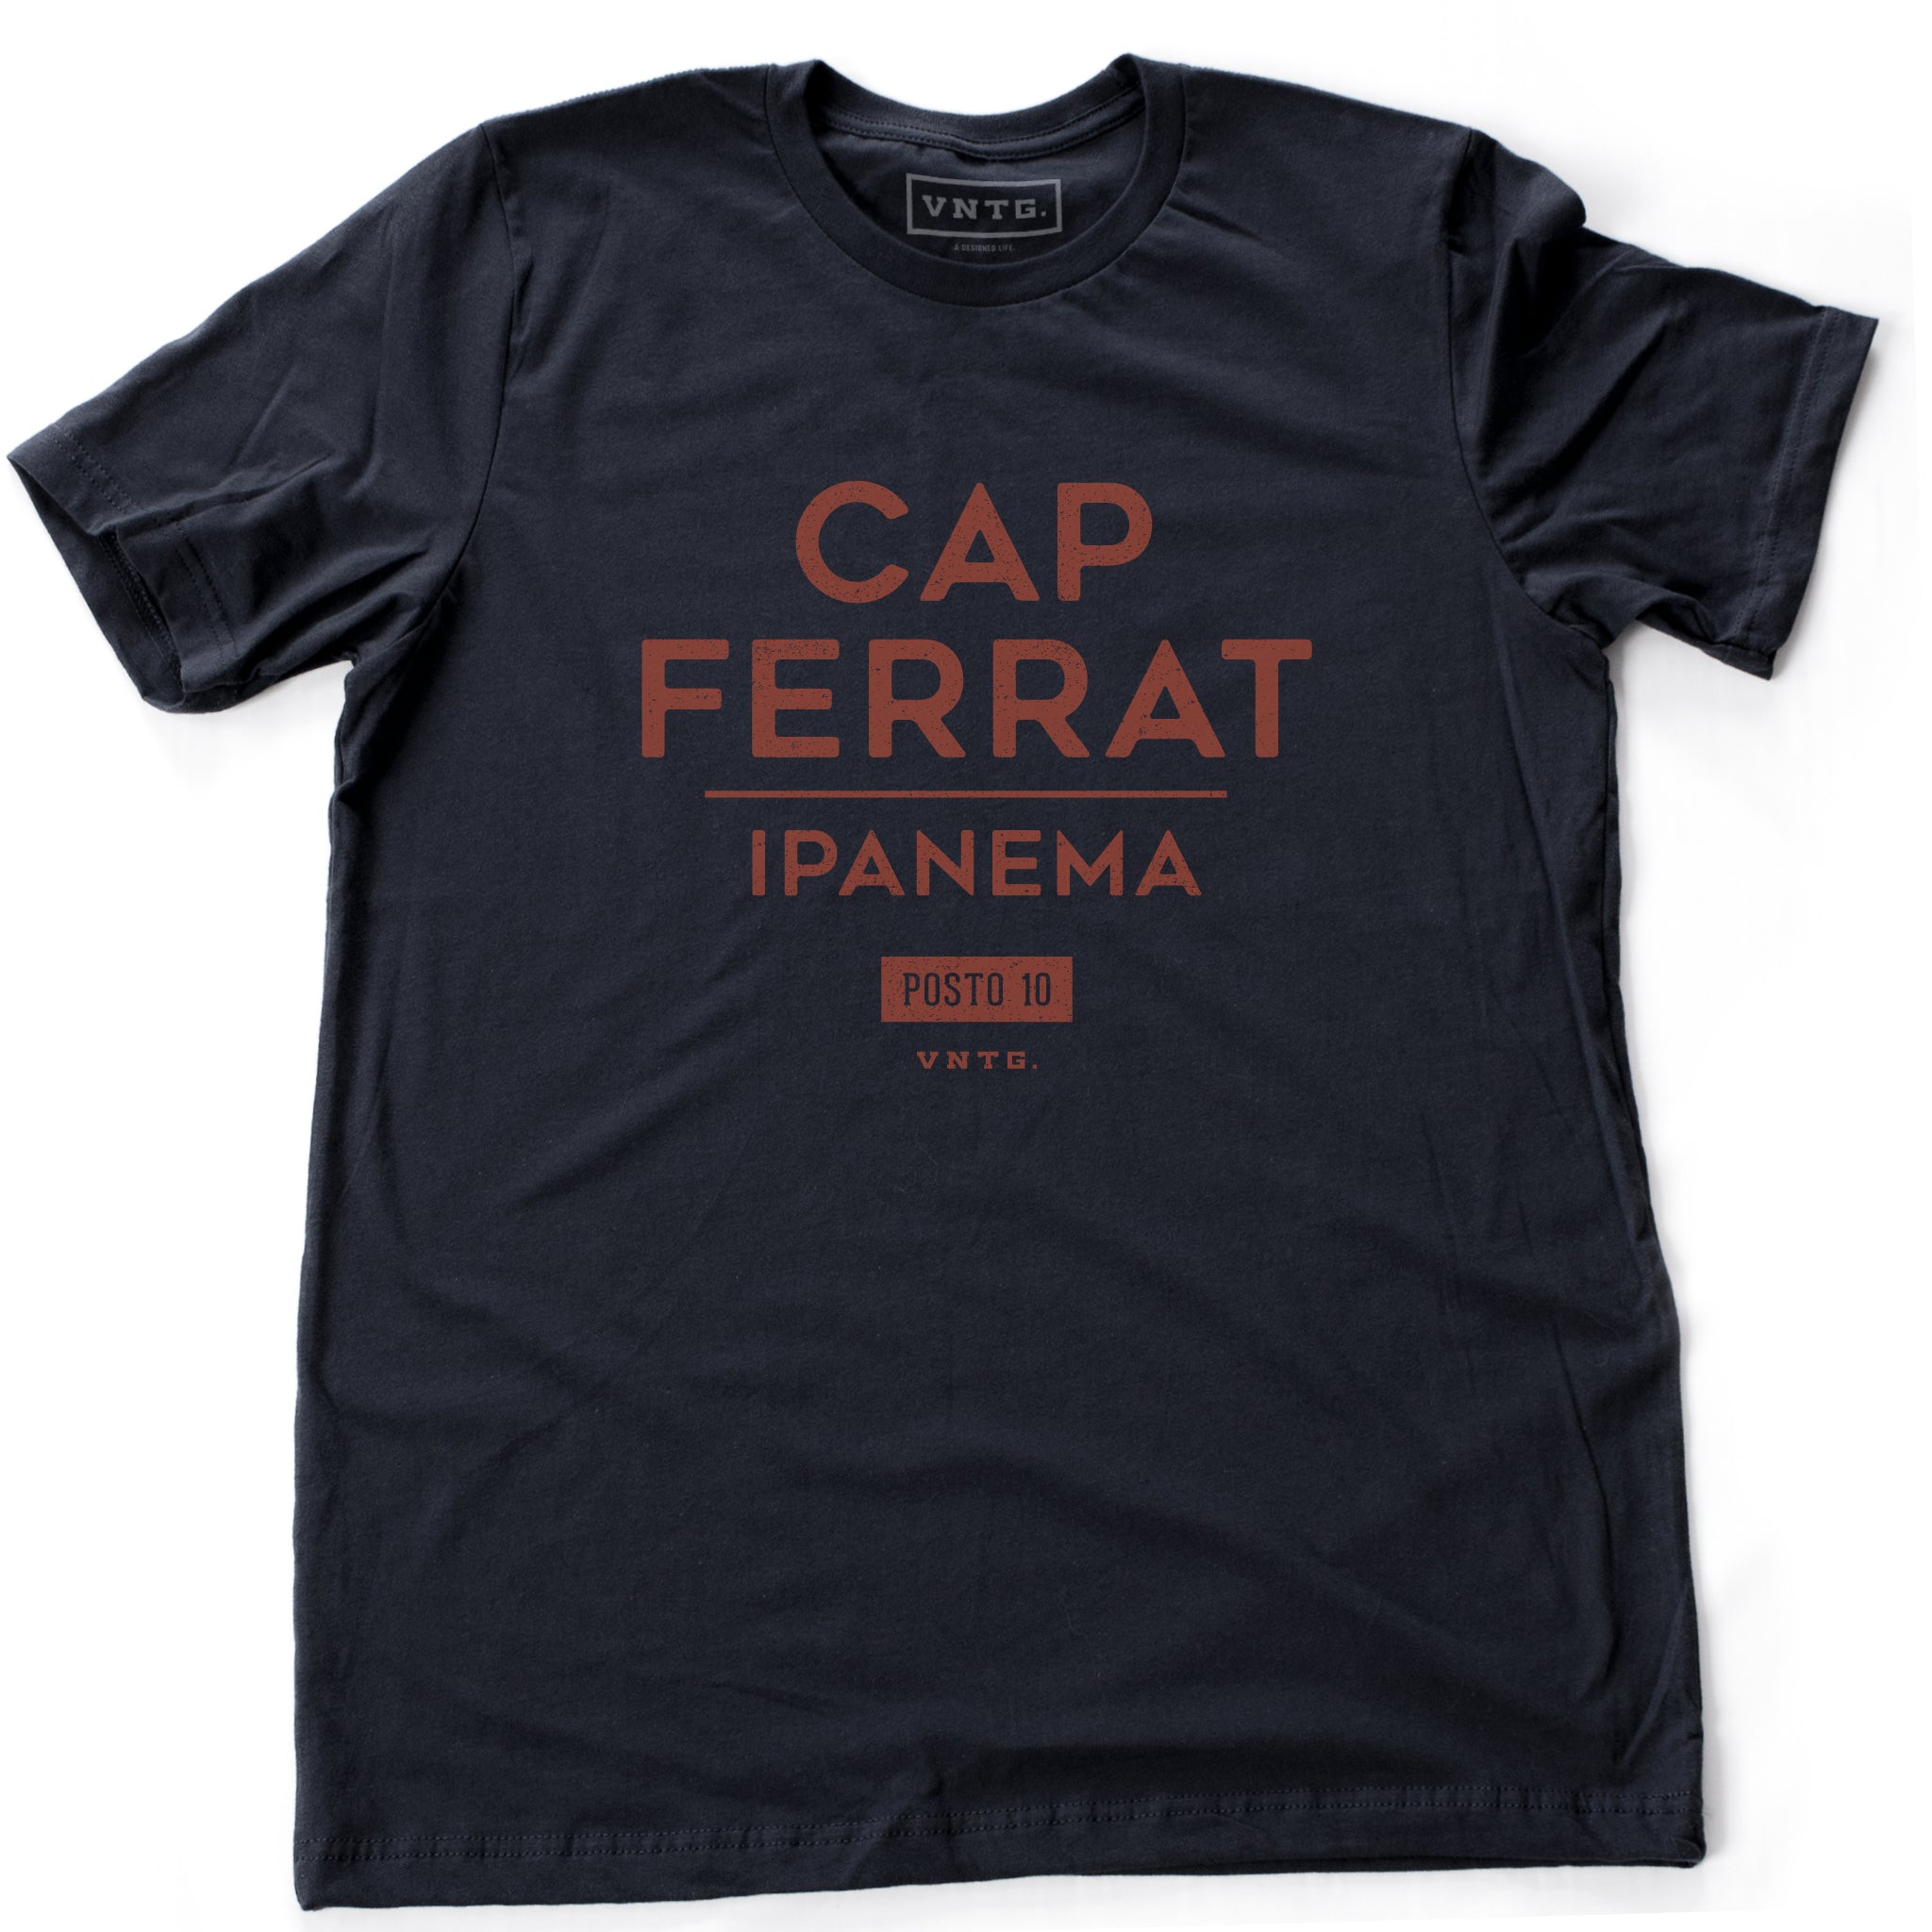 A classic navy blue fashion t-shirt featuring a stylish retro, vintage-inspired graphic typography with the words Cap Ferrat, Ipanema, a popular beach spot in Rio de Janeiro, Brazil. 